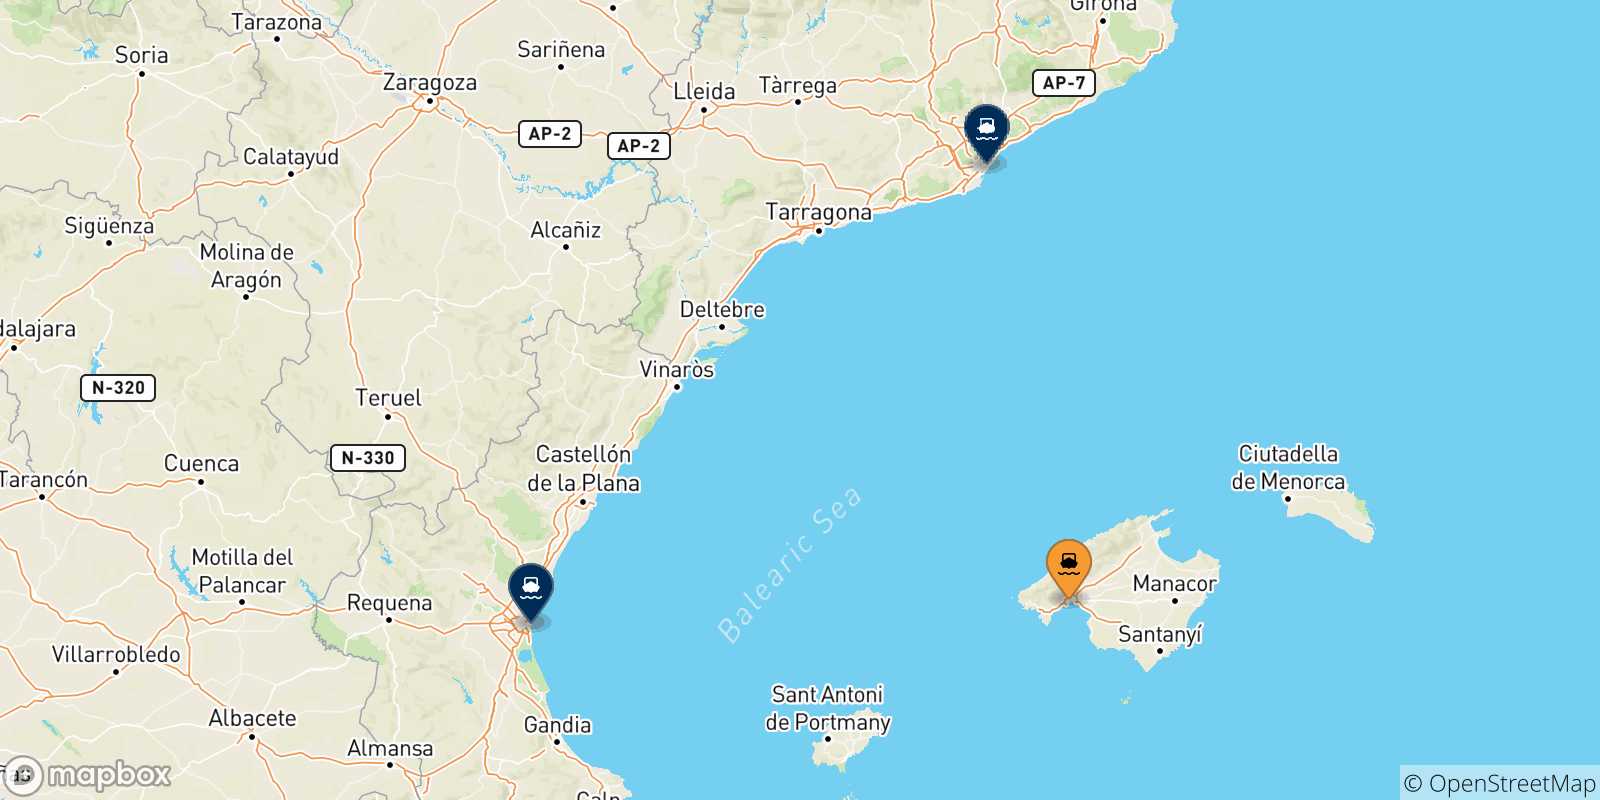 Map of the possible routes between Palma and Spain